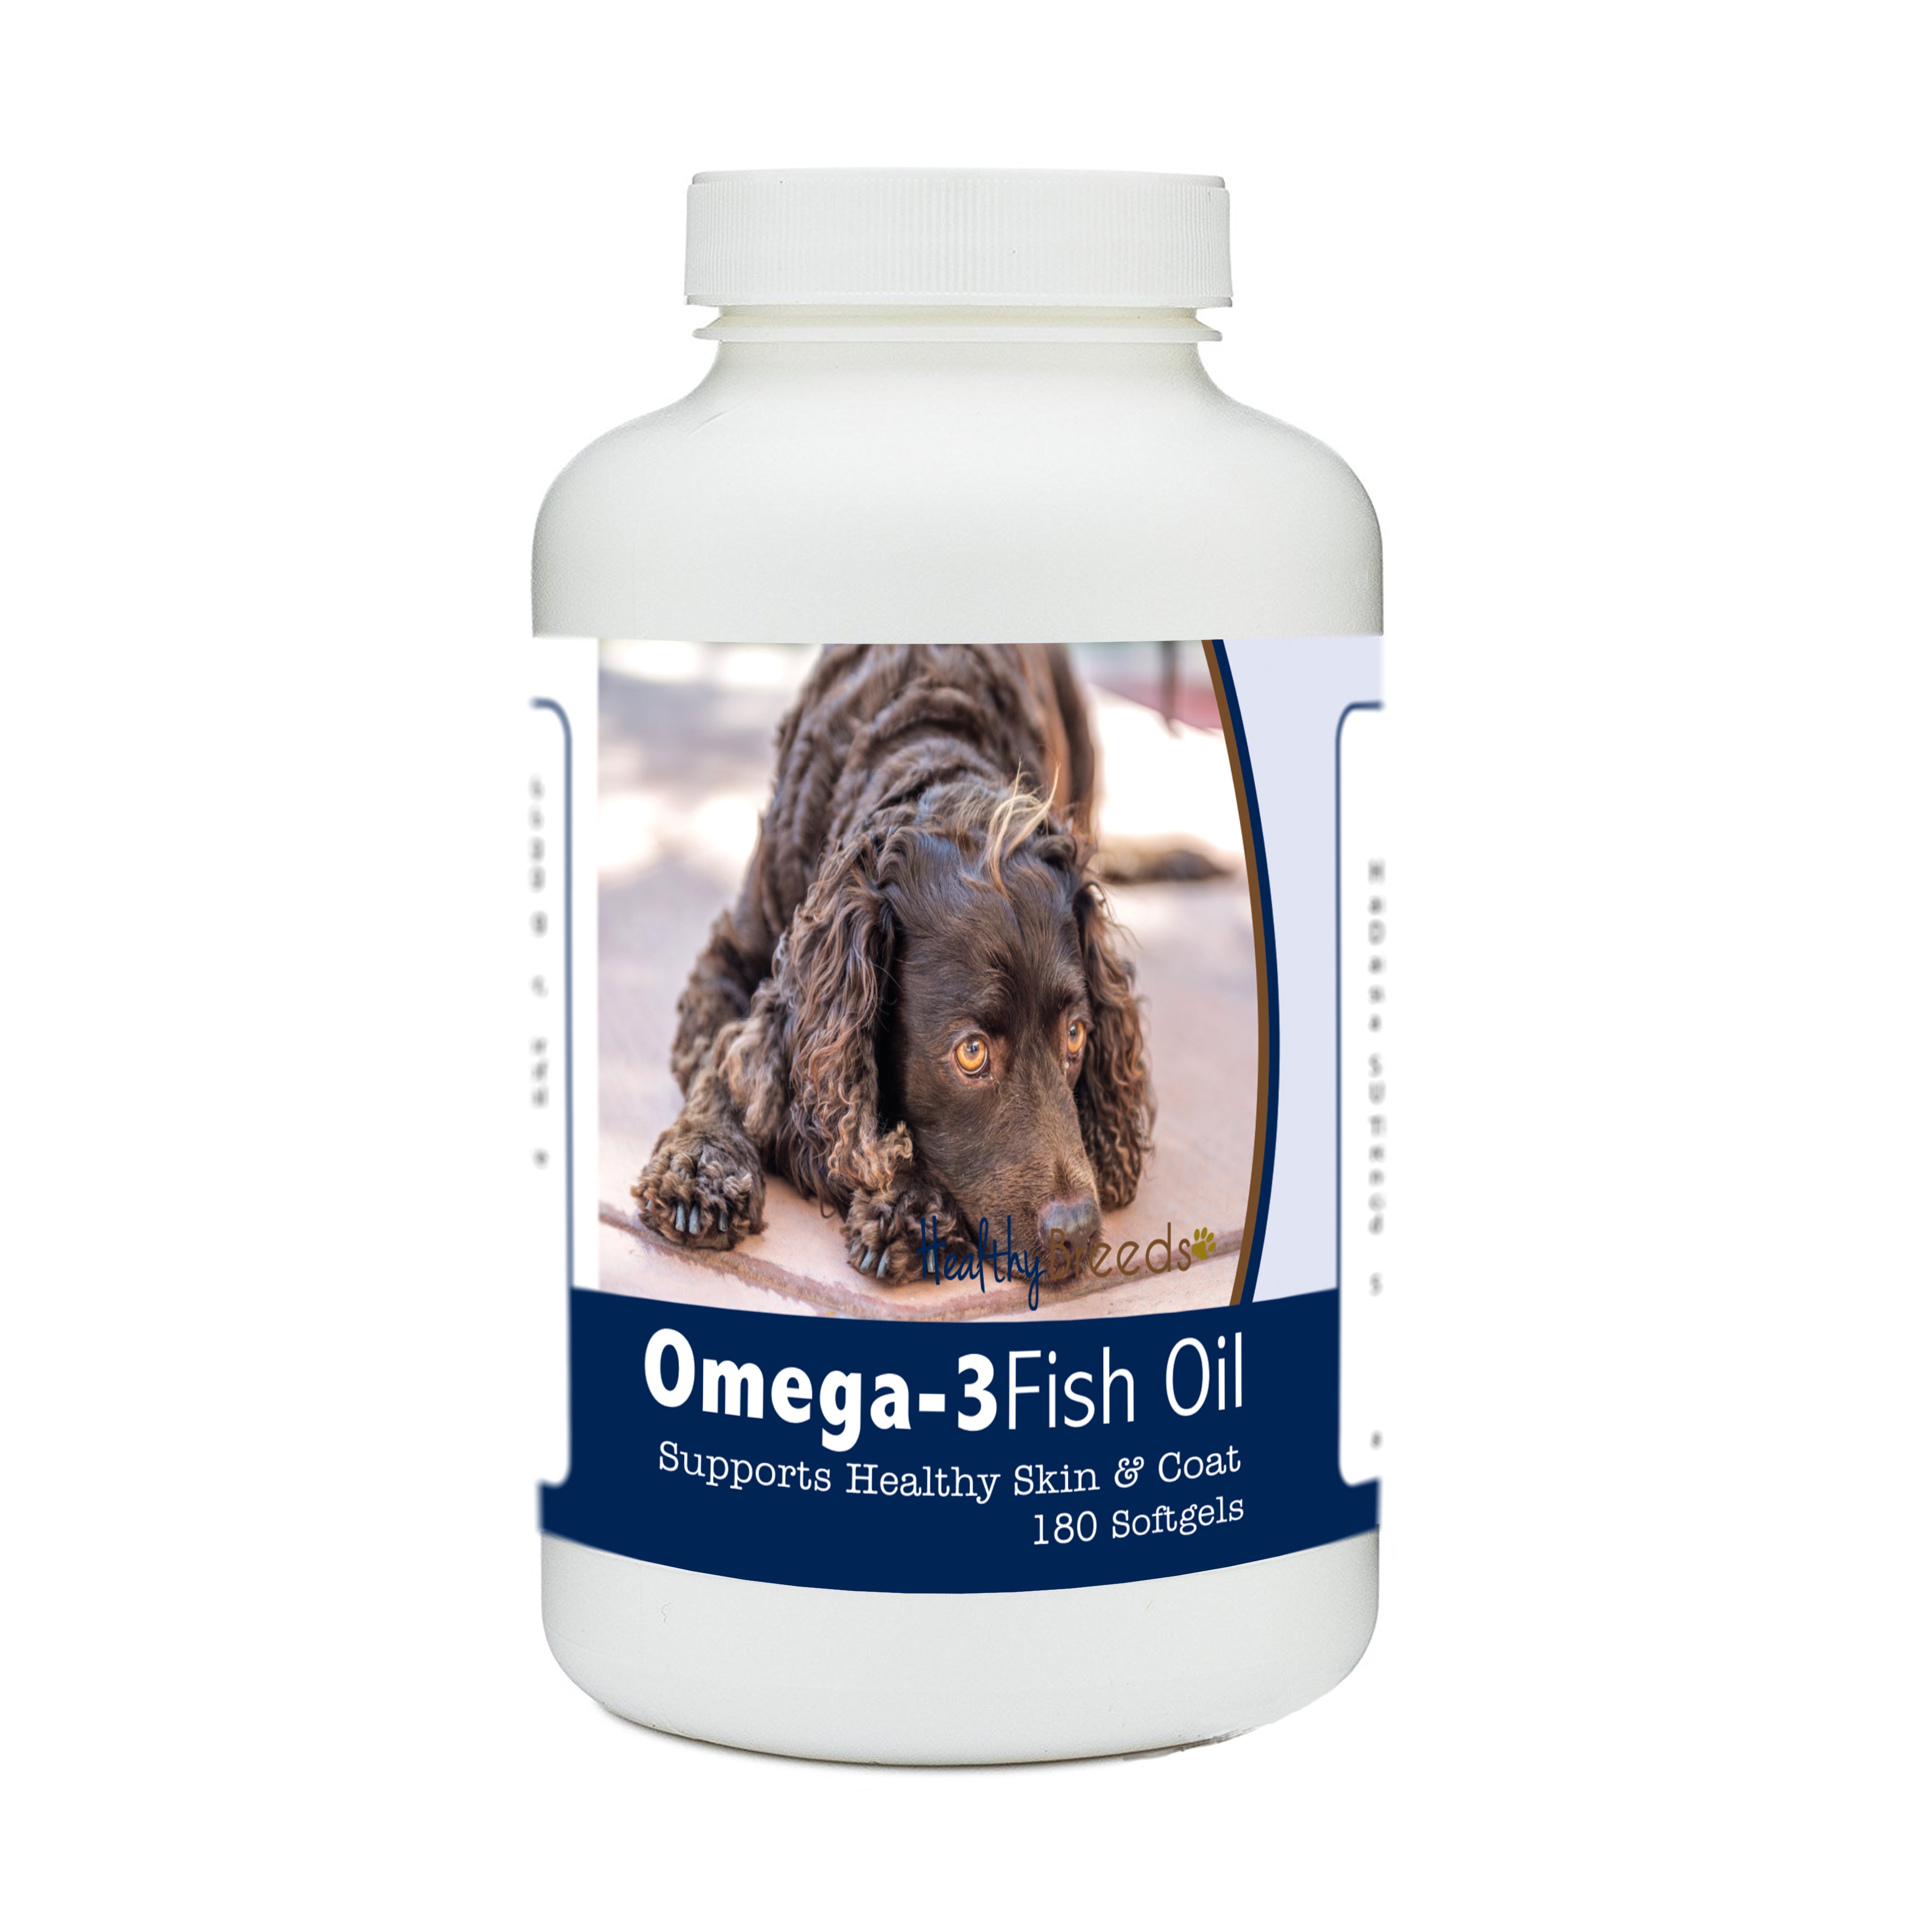 American Water Spaniel Omega-3 Fish Oil Softgels 180 Count